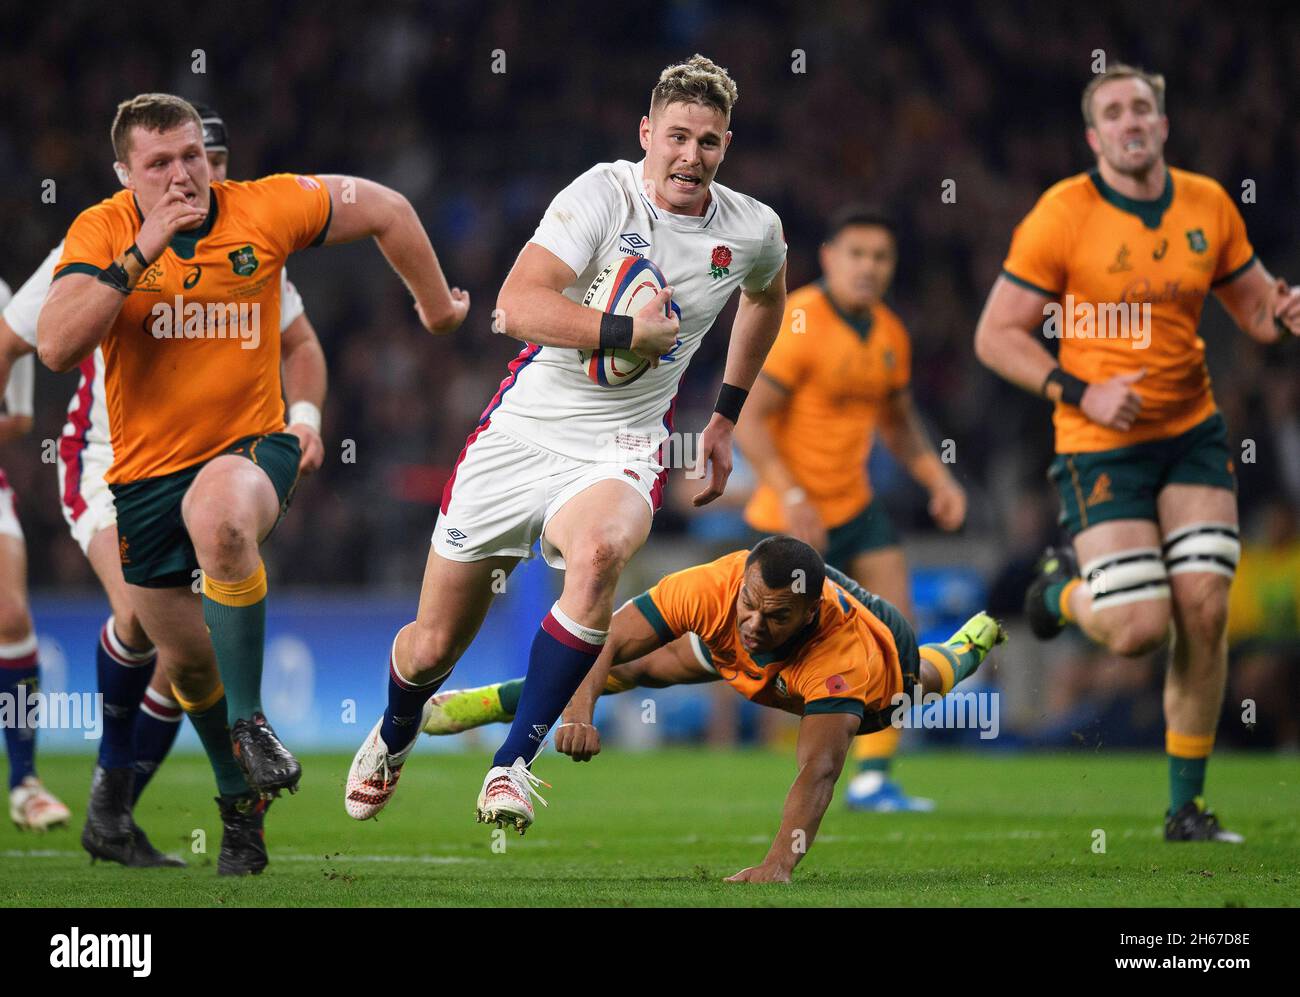 13 November 2021 -  England v Australia - Twickenham  England's Freddie Steward charges through to score the first try during the Autumn International match at Twickenham. Picture Credit : © Mark Pain / Alamy Live News Stock Photo